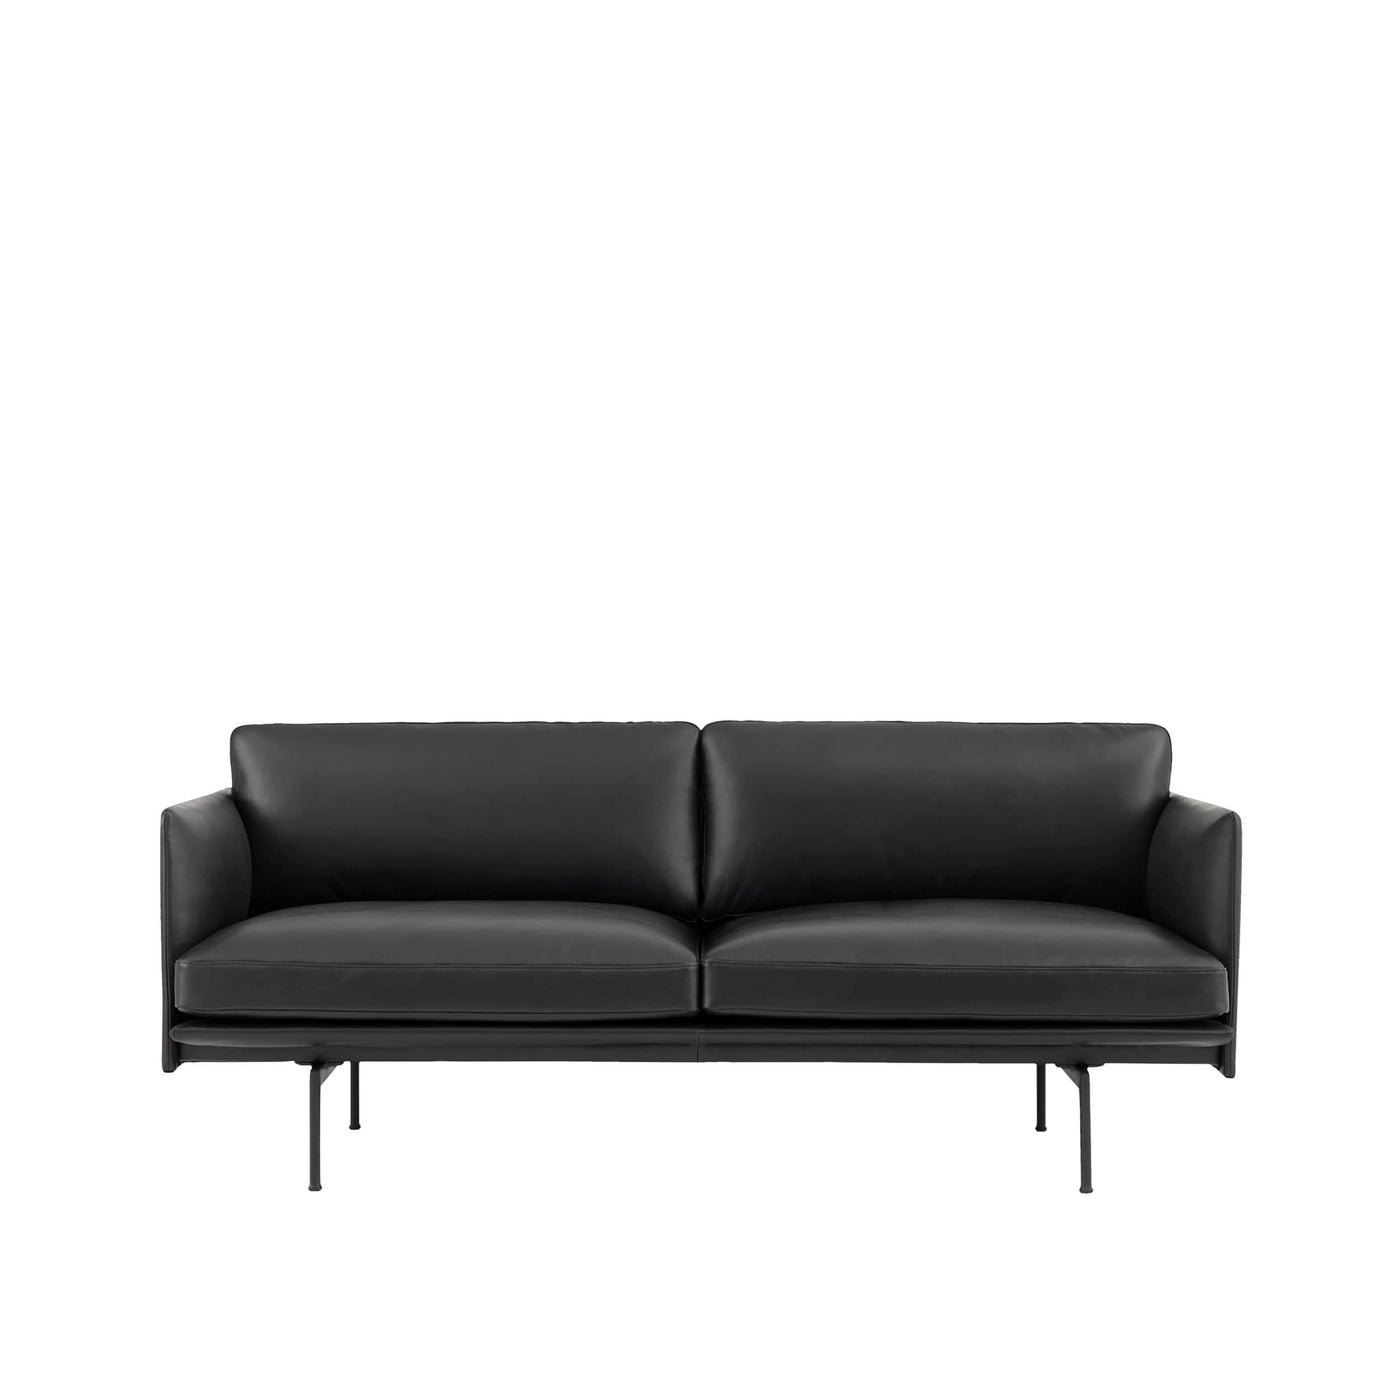 Muuto Outline 2 Seater Sofa in Black Refine Leather. Made to order from someday designs